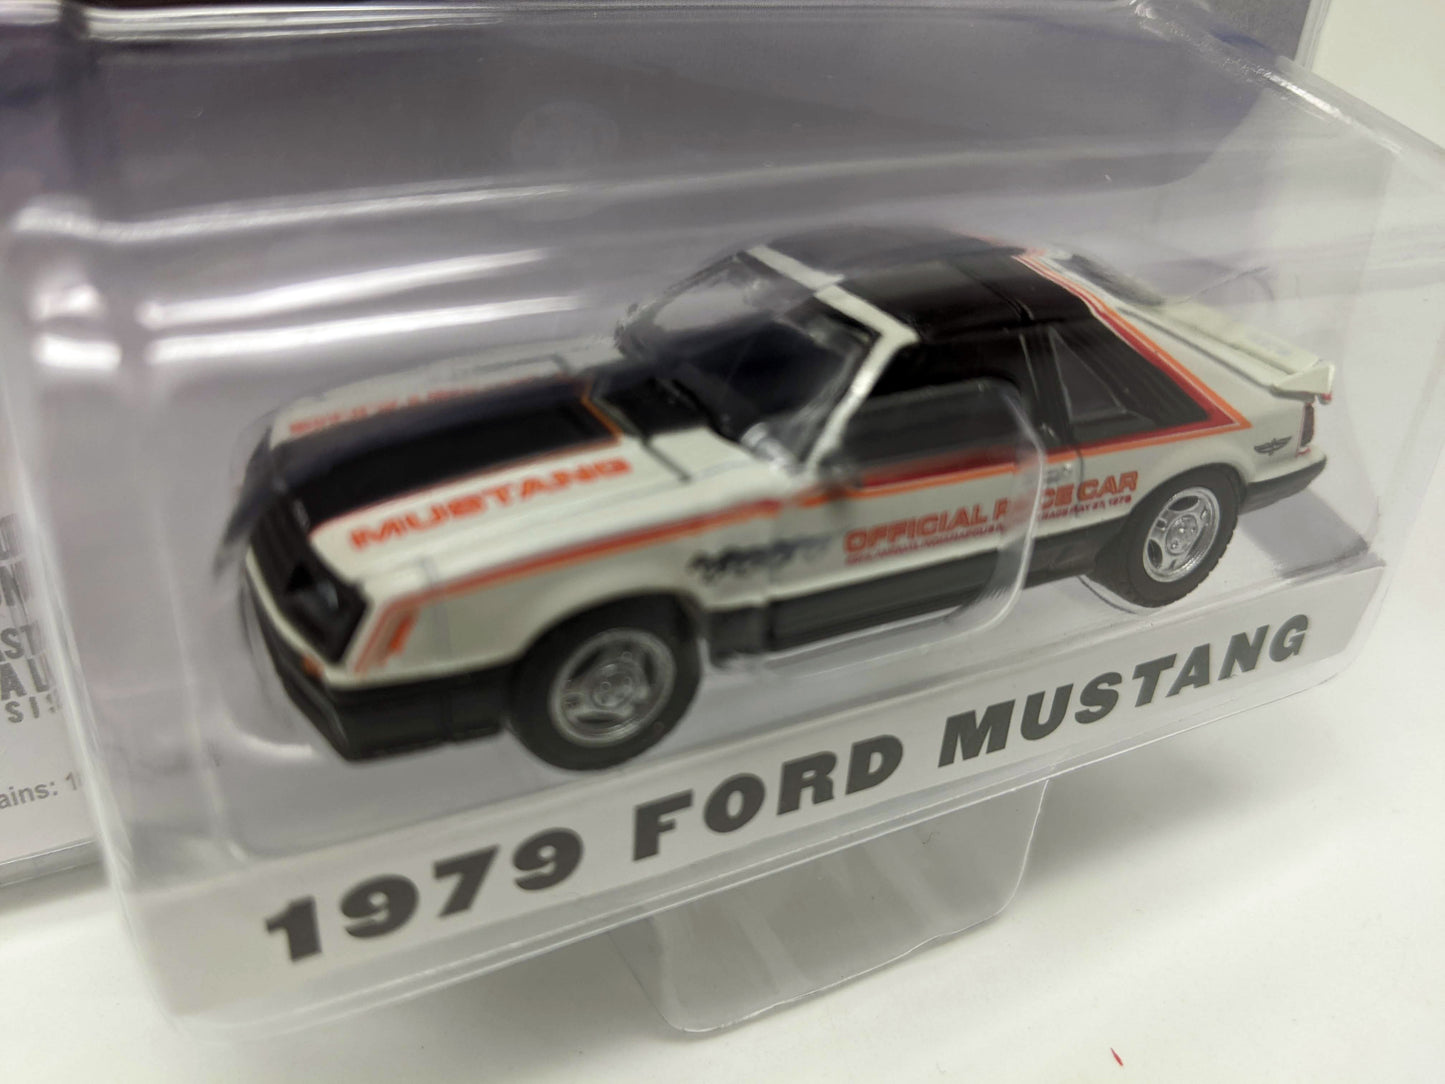 GL - 1979 Ford Mustang Indianapolis Motor Speedway Pace Car